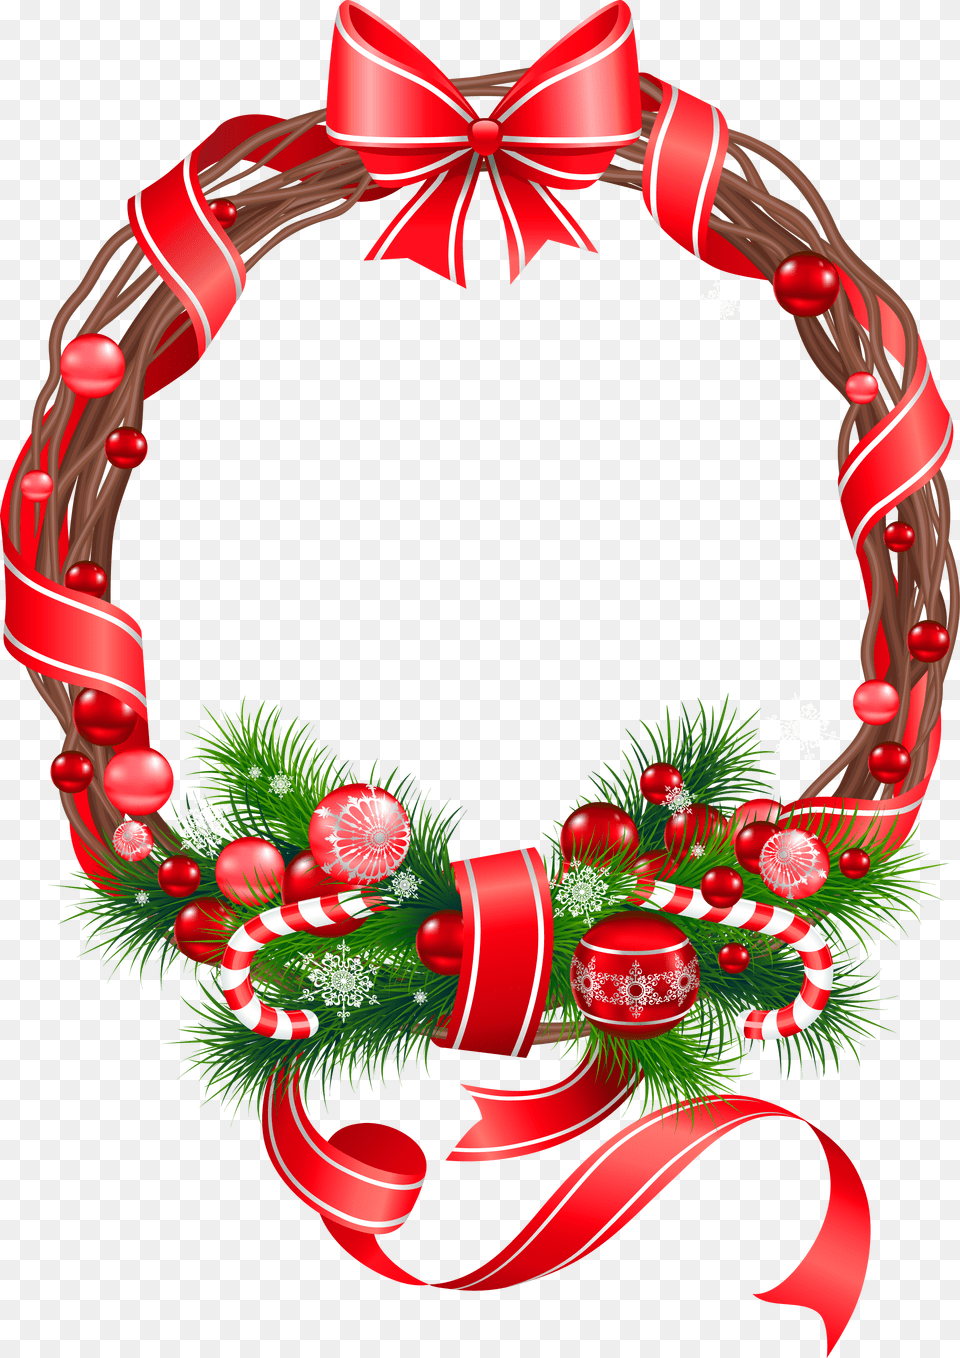 Christmas Ghirlande Le Classiche Christmas Wreath Designs, Dynamite, Weapon, Tape Png